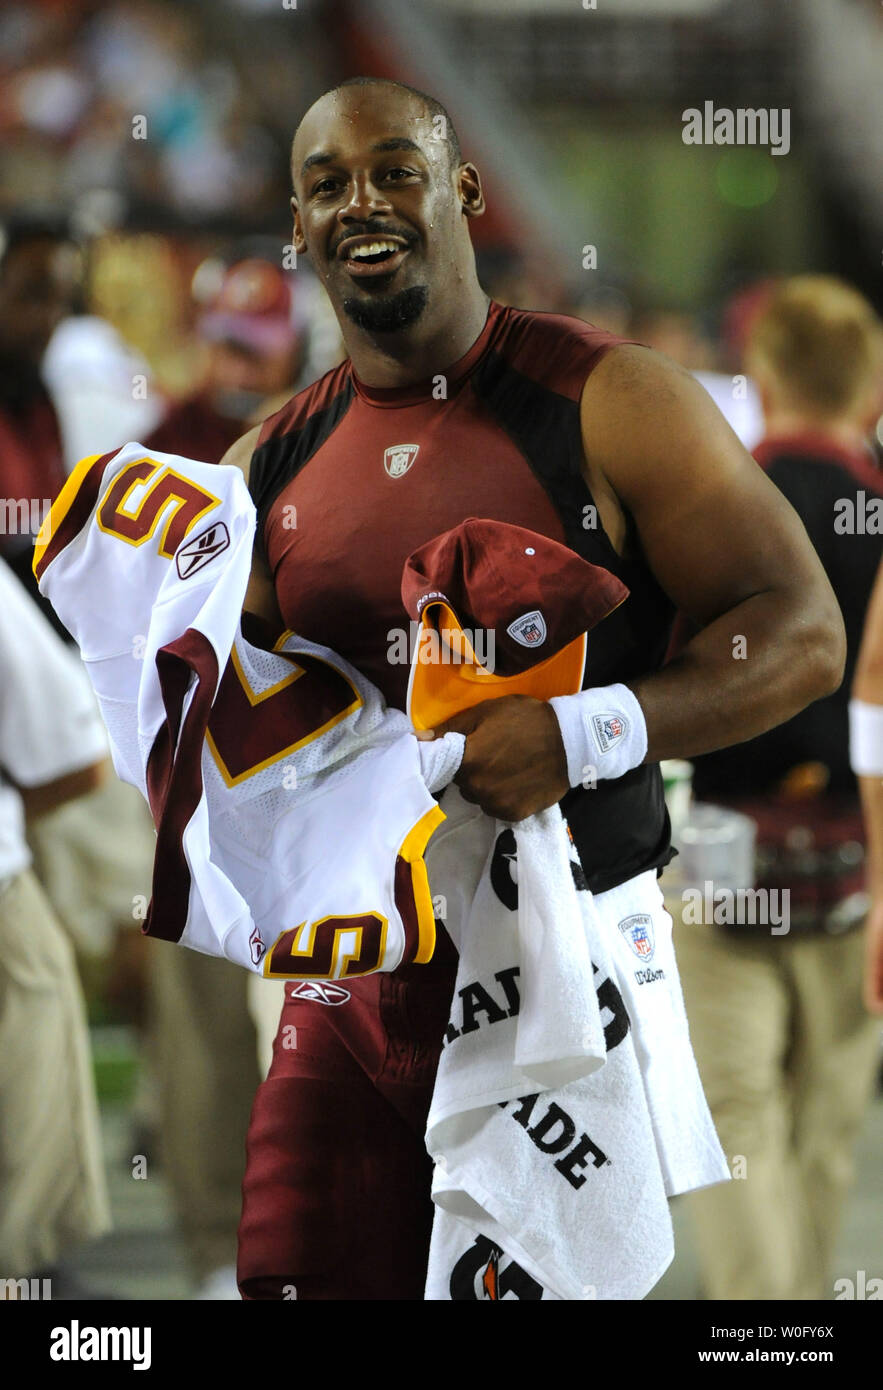 Washington Redskins' quarterback Donovan McNabb is seen on the sidelines as the Redskins play a pre-season game against the Buffalo Bills at FedEx Field in Washington on August 13, 2010.   UPI/Kevin Dietsch Stock Photo